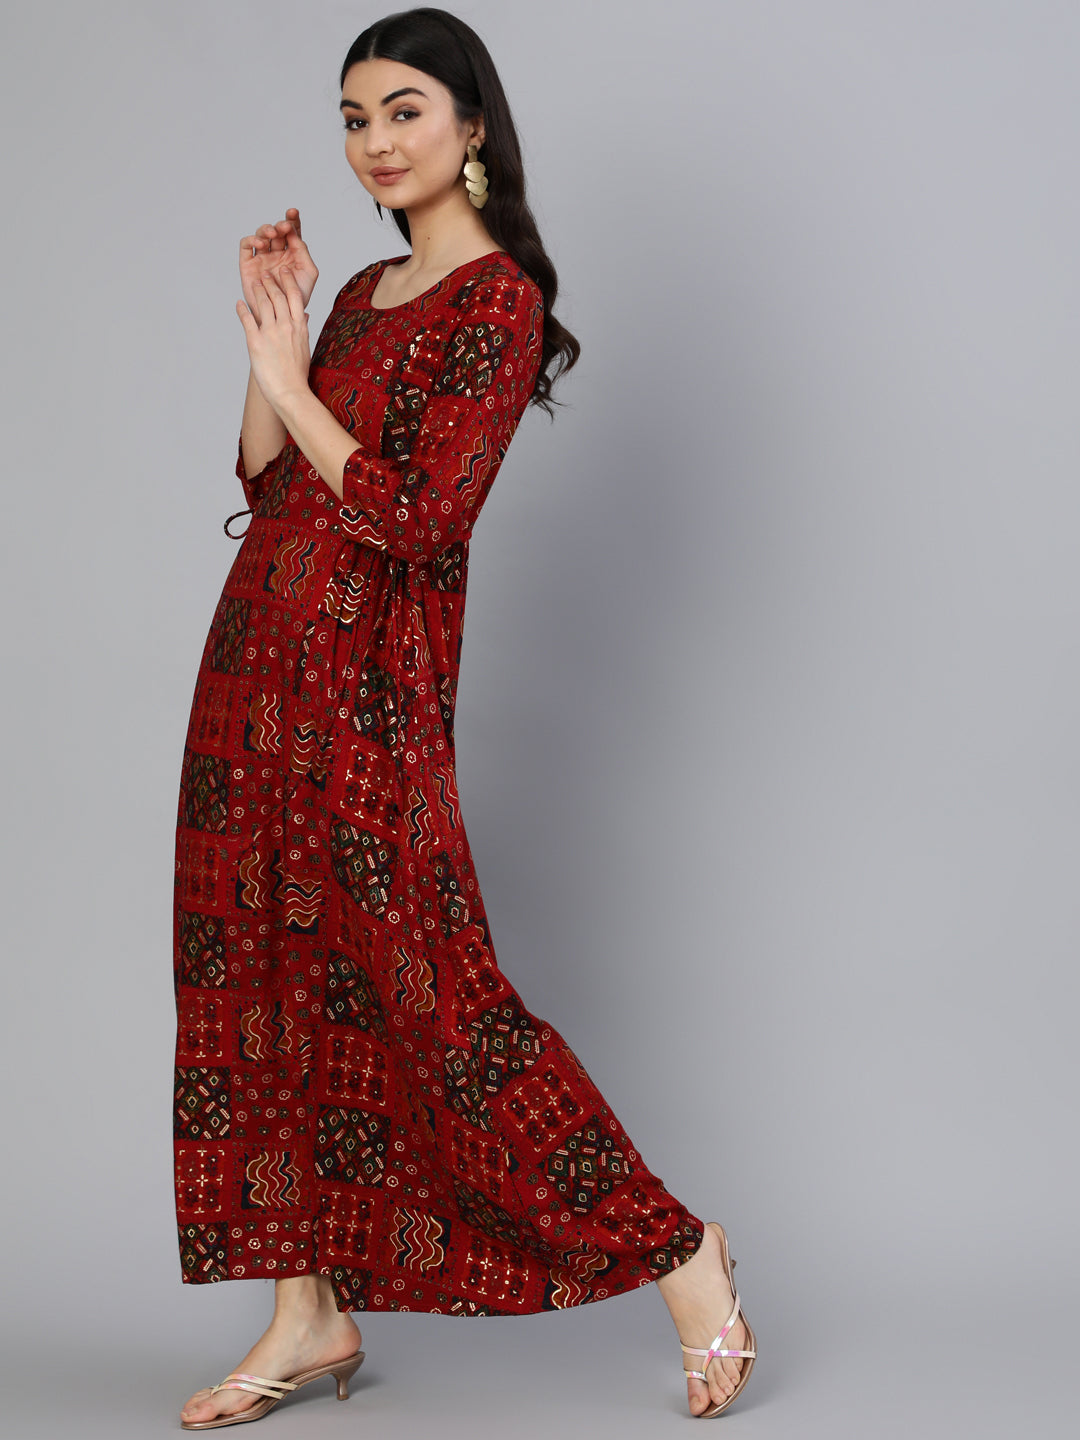 Women's Red Printed Dress With Three Quarter Sleeves - Nayo Clothing